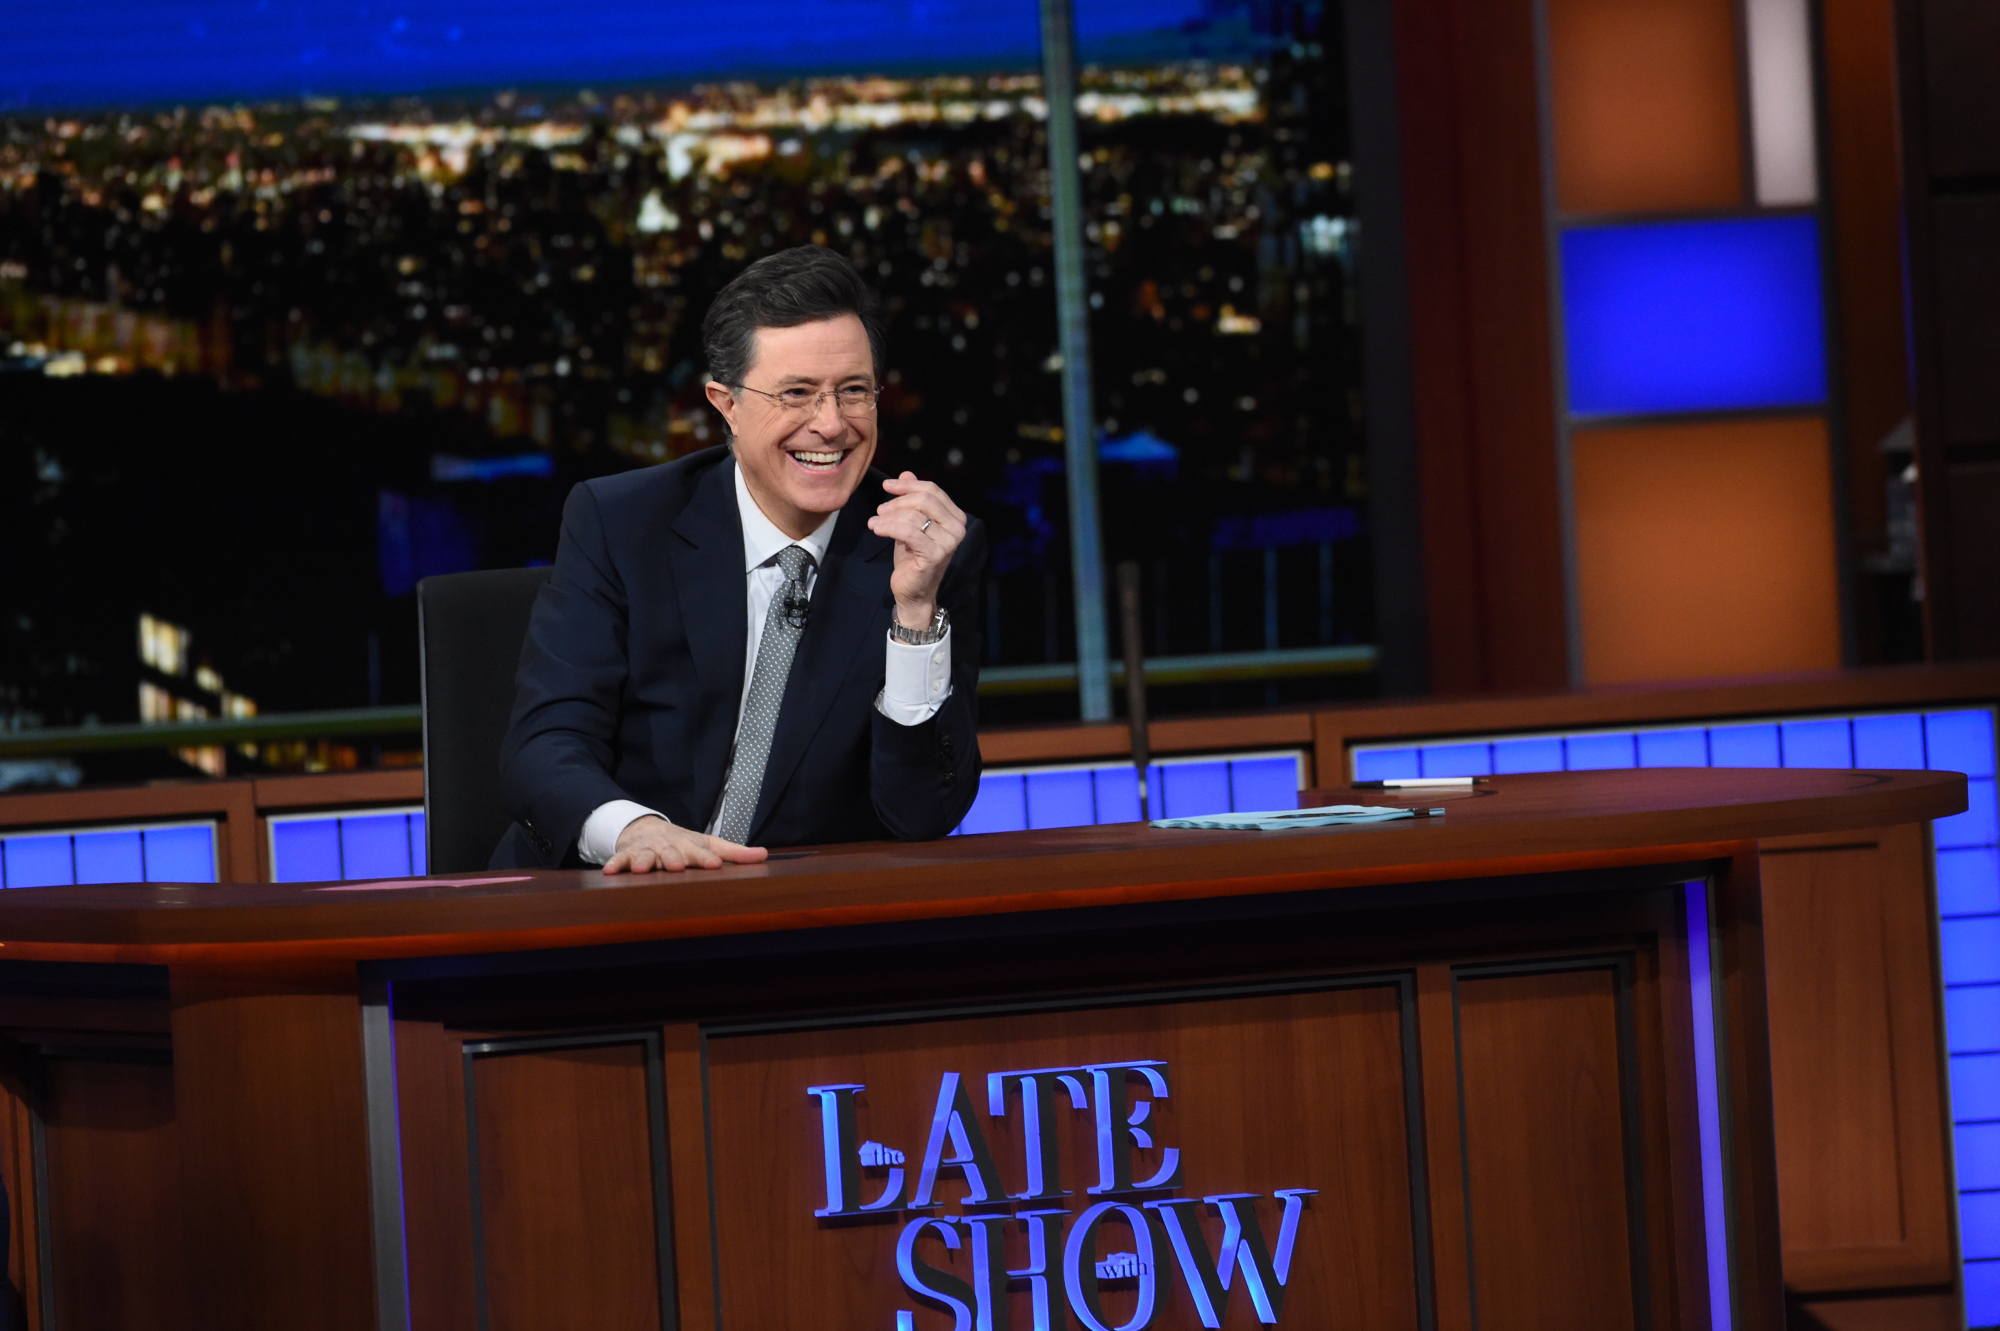 Stephen Colbert on The Late Show, Feb. 7, 2016 on the CBS Television Network.